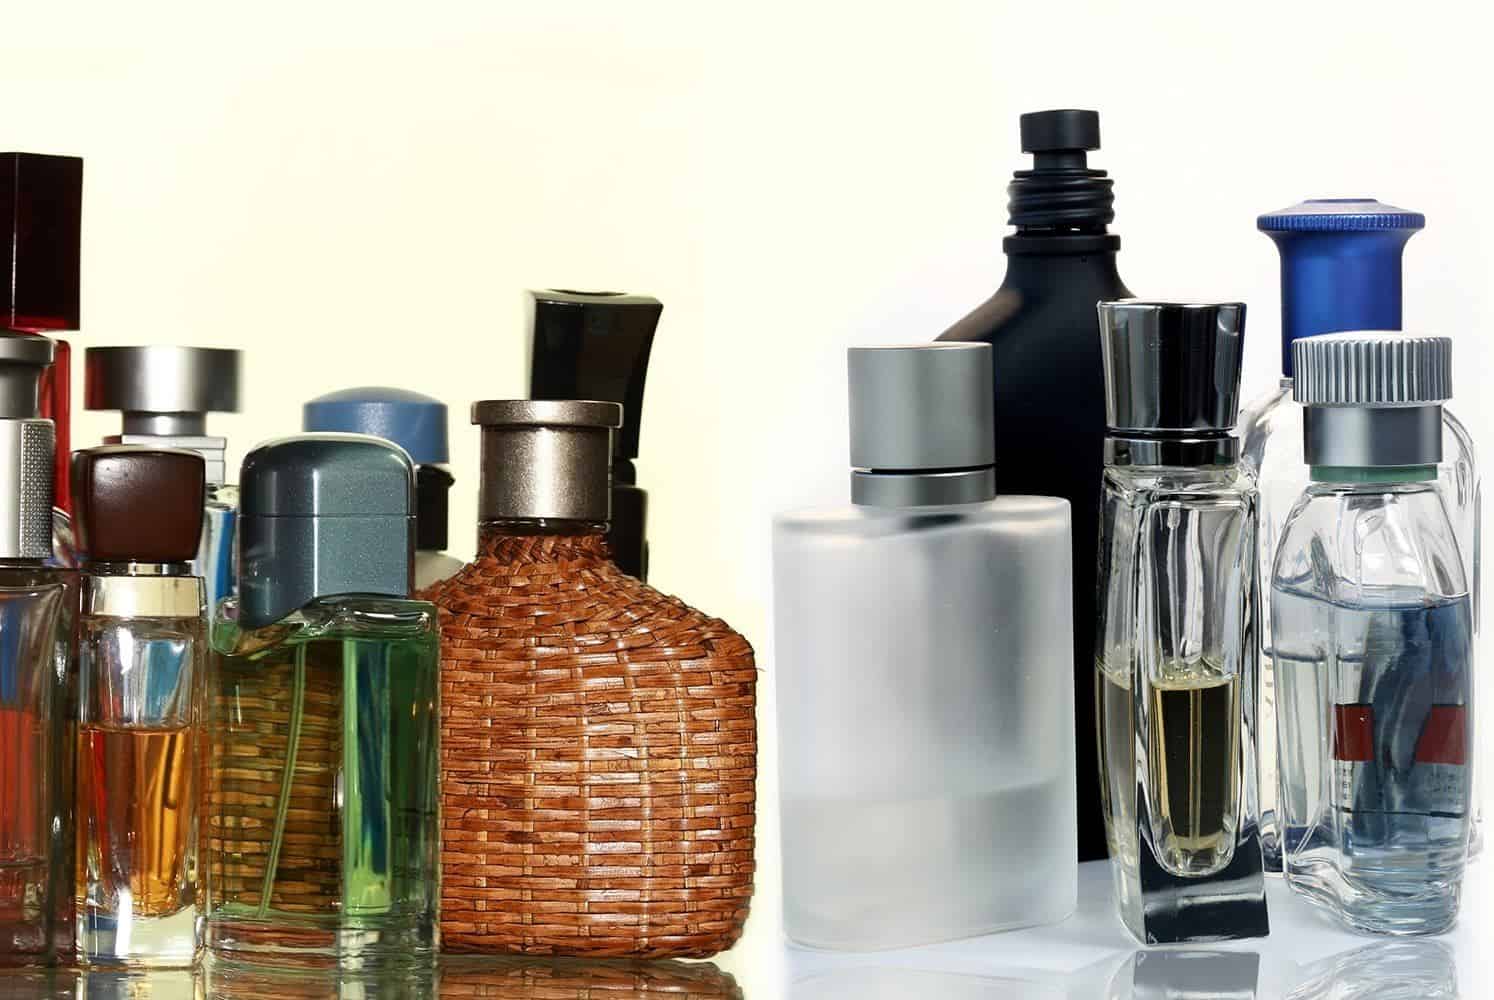 What is the best cologne for men?